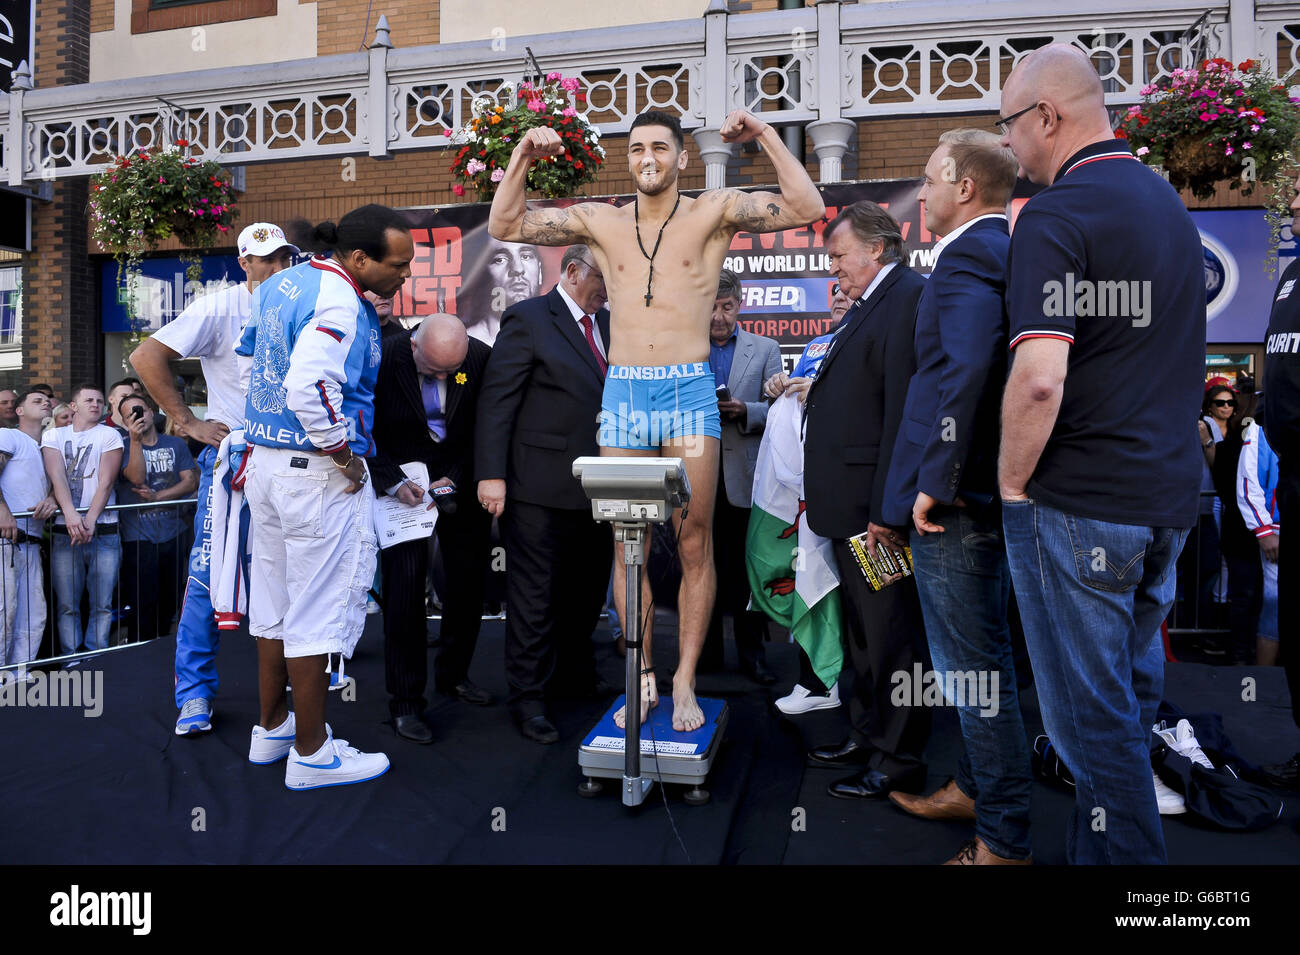 WBO World Light-Heavyweight Champion Nathan Cleverly flexes his muscles on the scales during the weigh in in Queen Street, Cardiff. Stock Photo